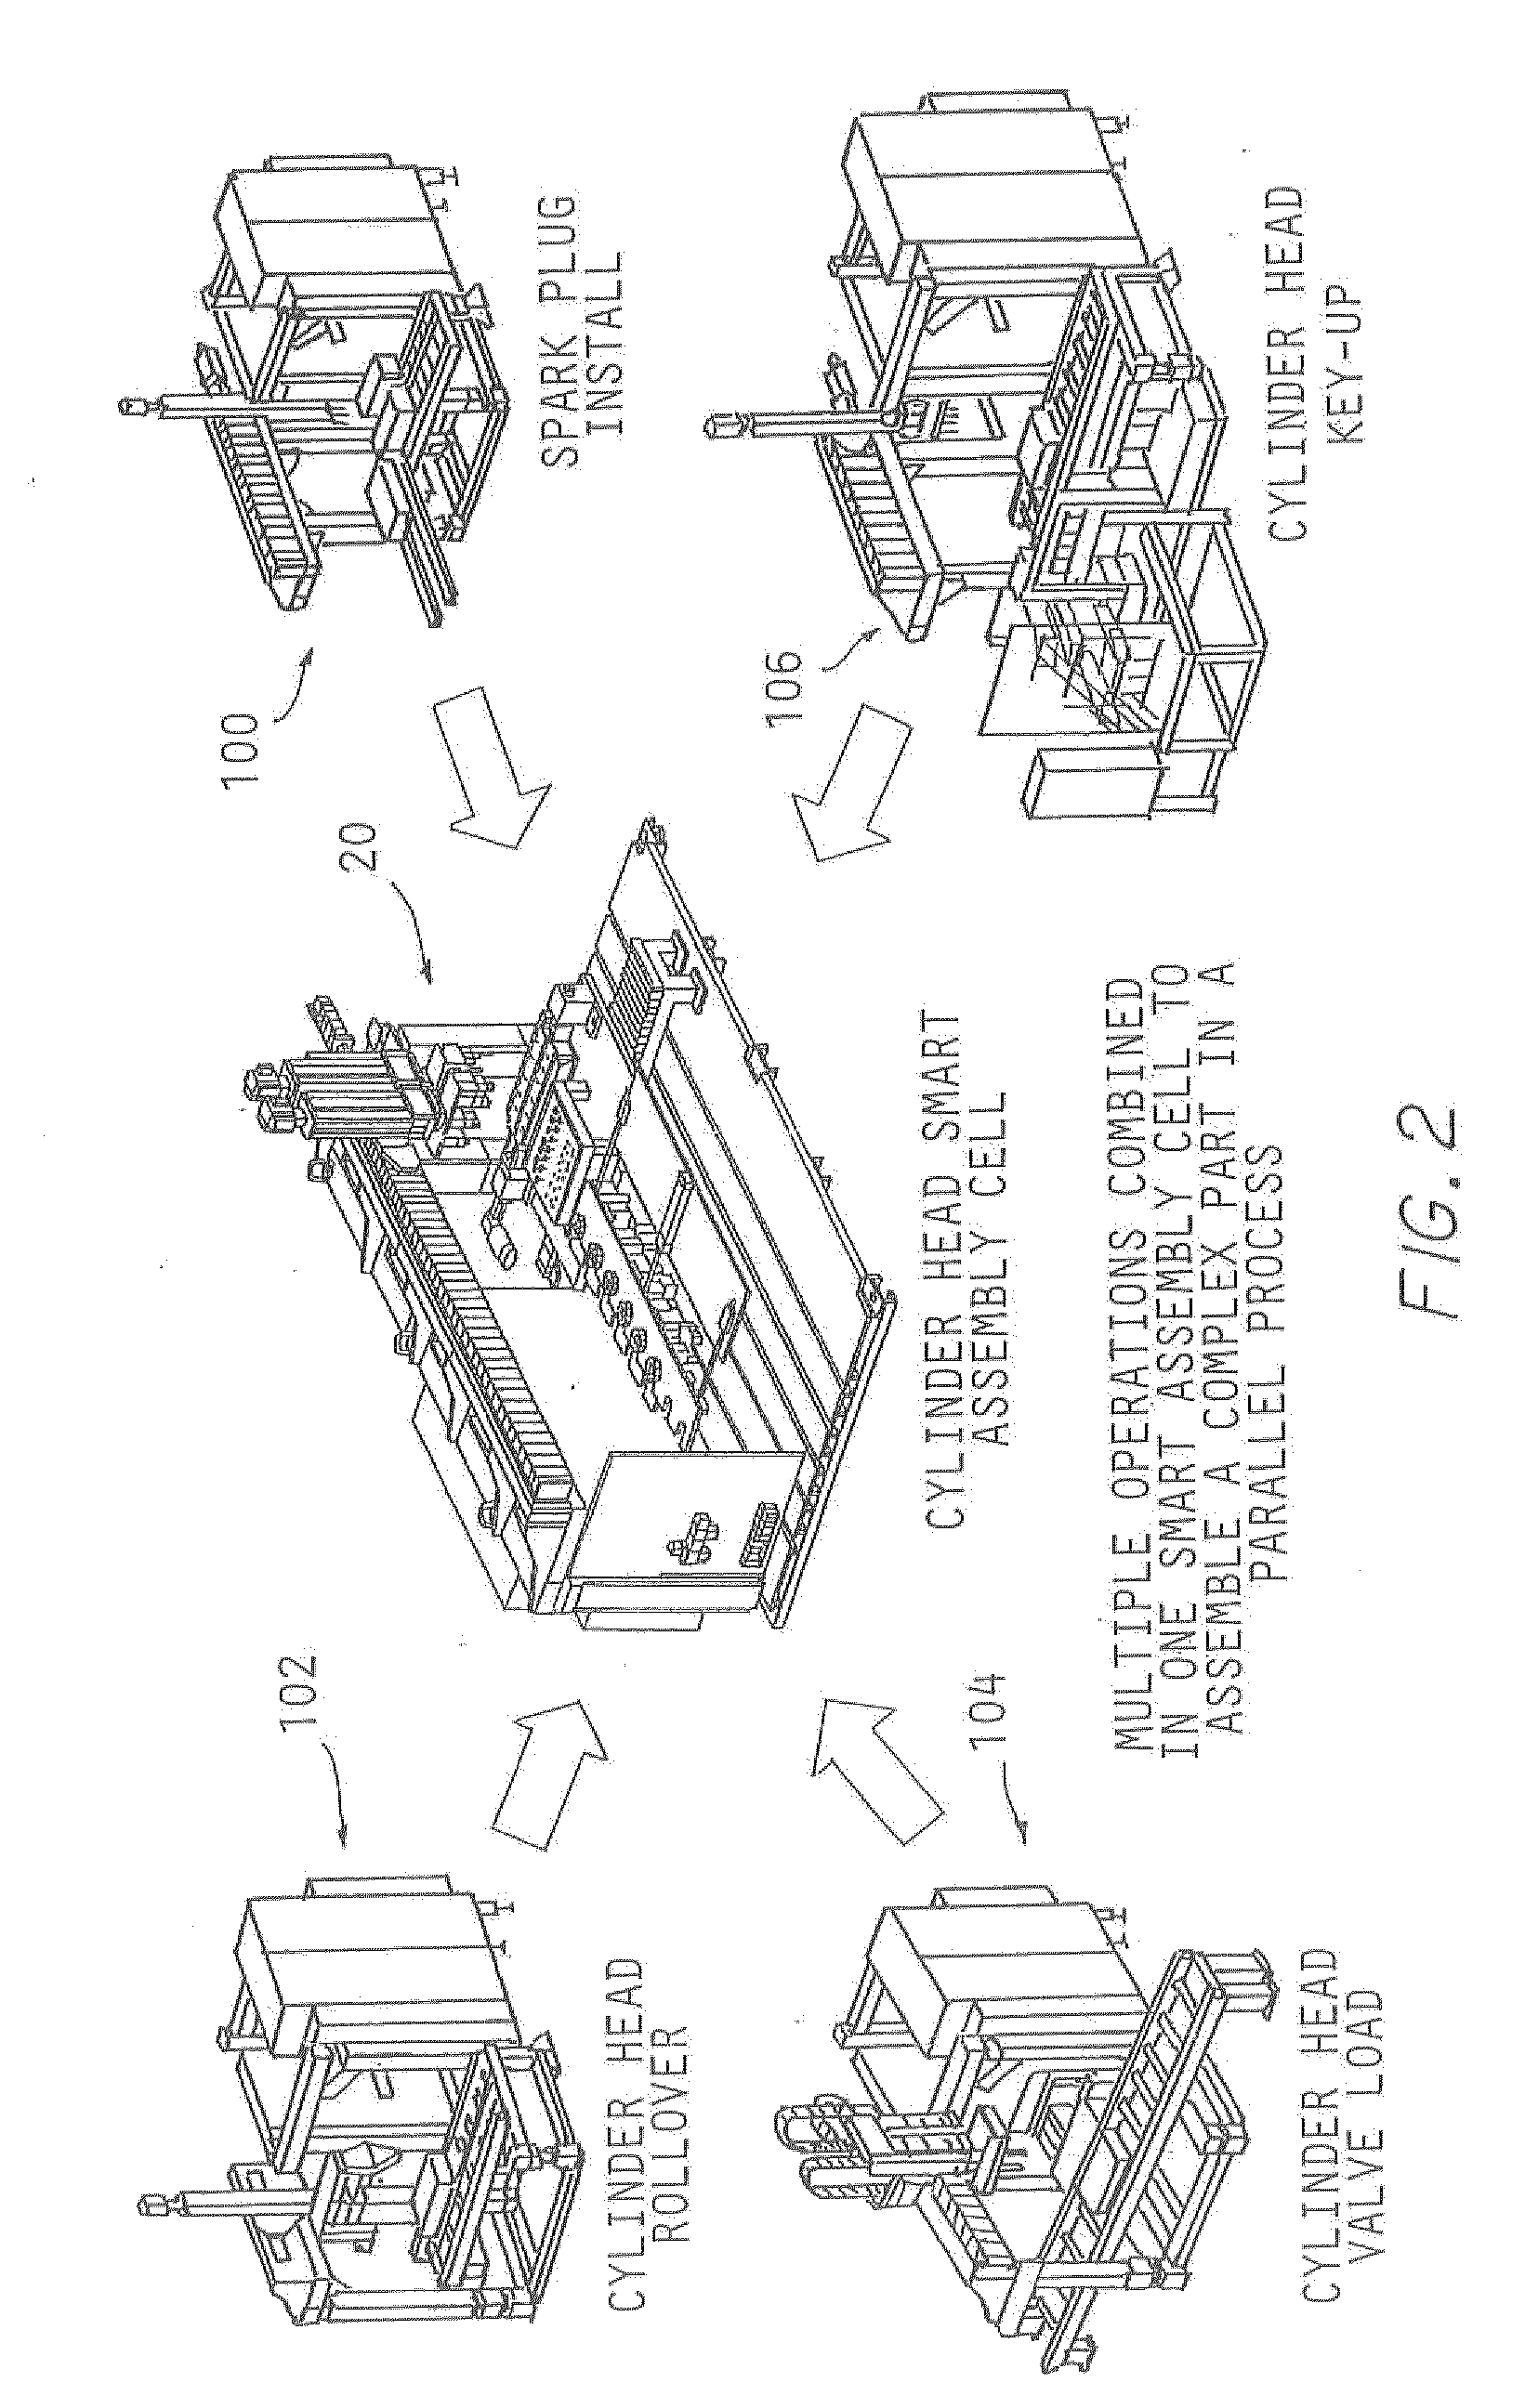 Method and apparatus forassembling a complex product ina parrallel process system